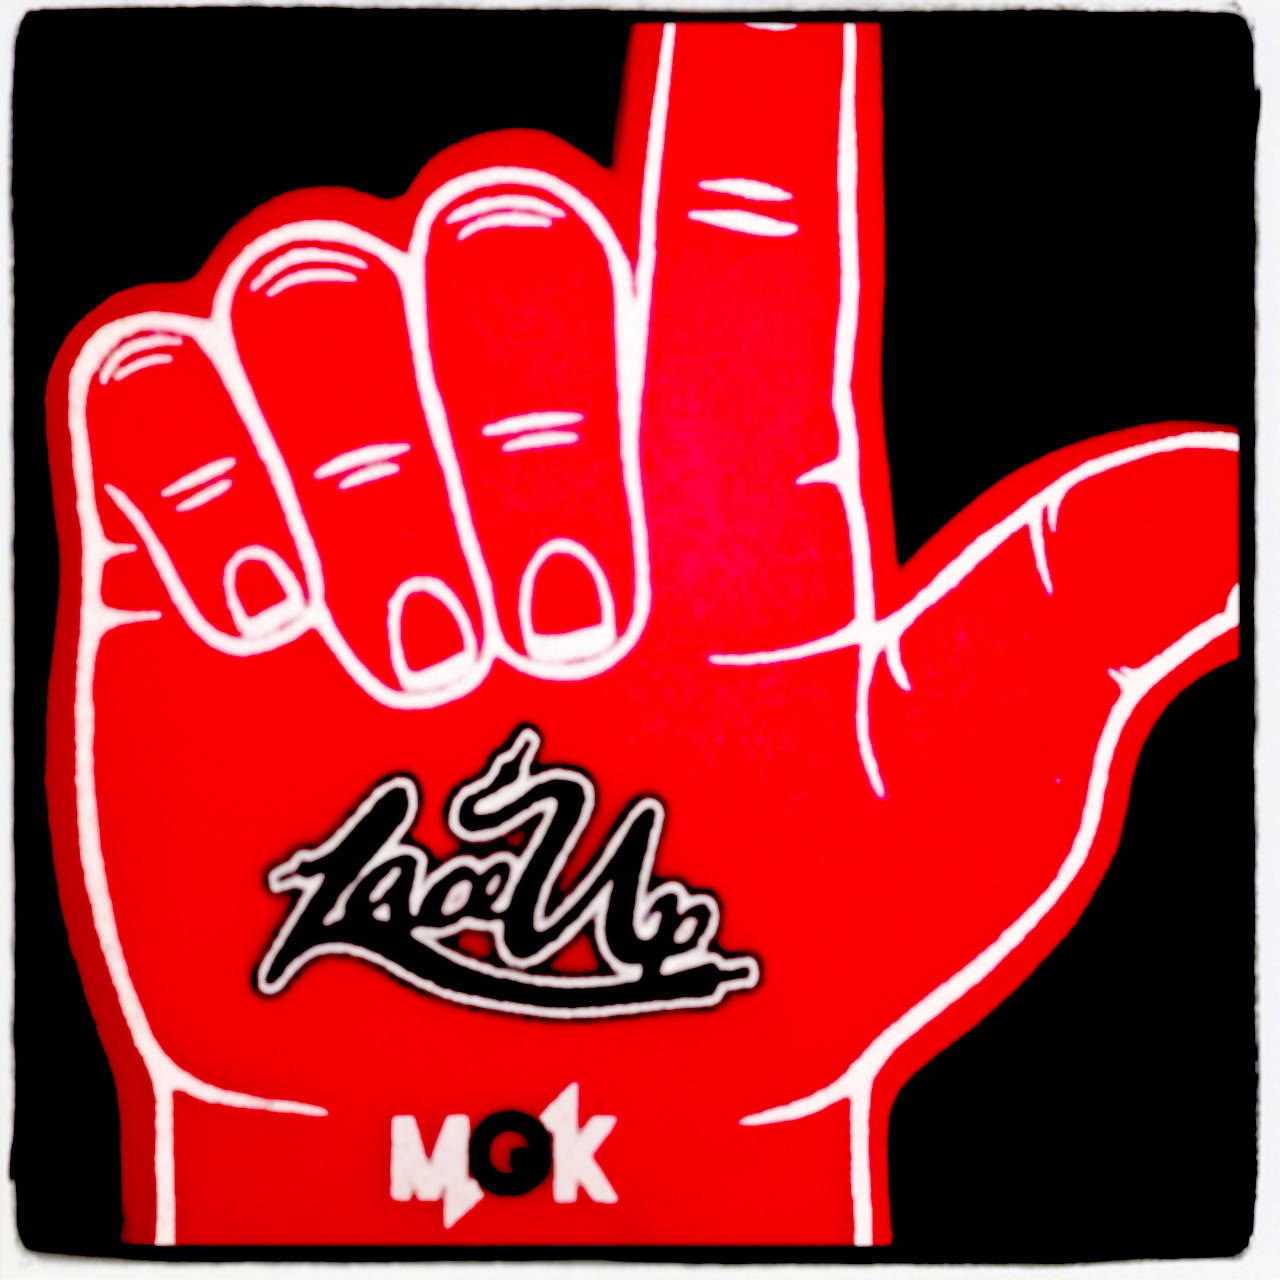 Lace Up Red Hand Sign Wallpaper